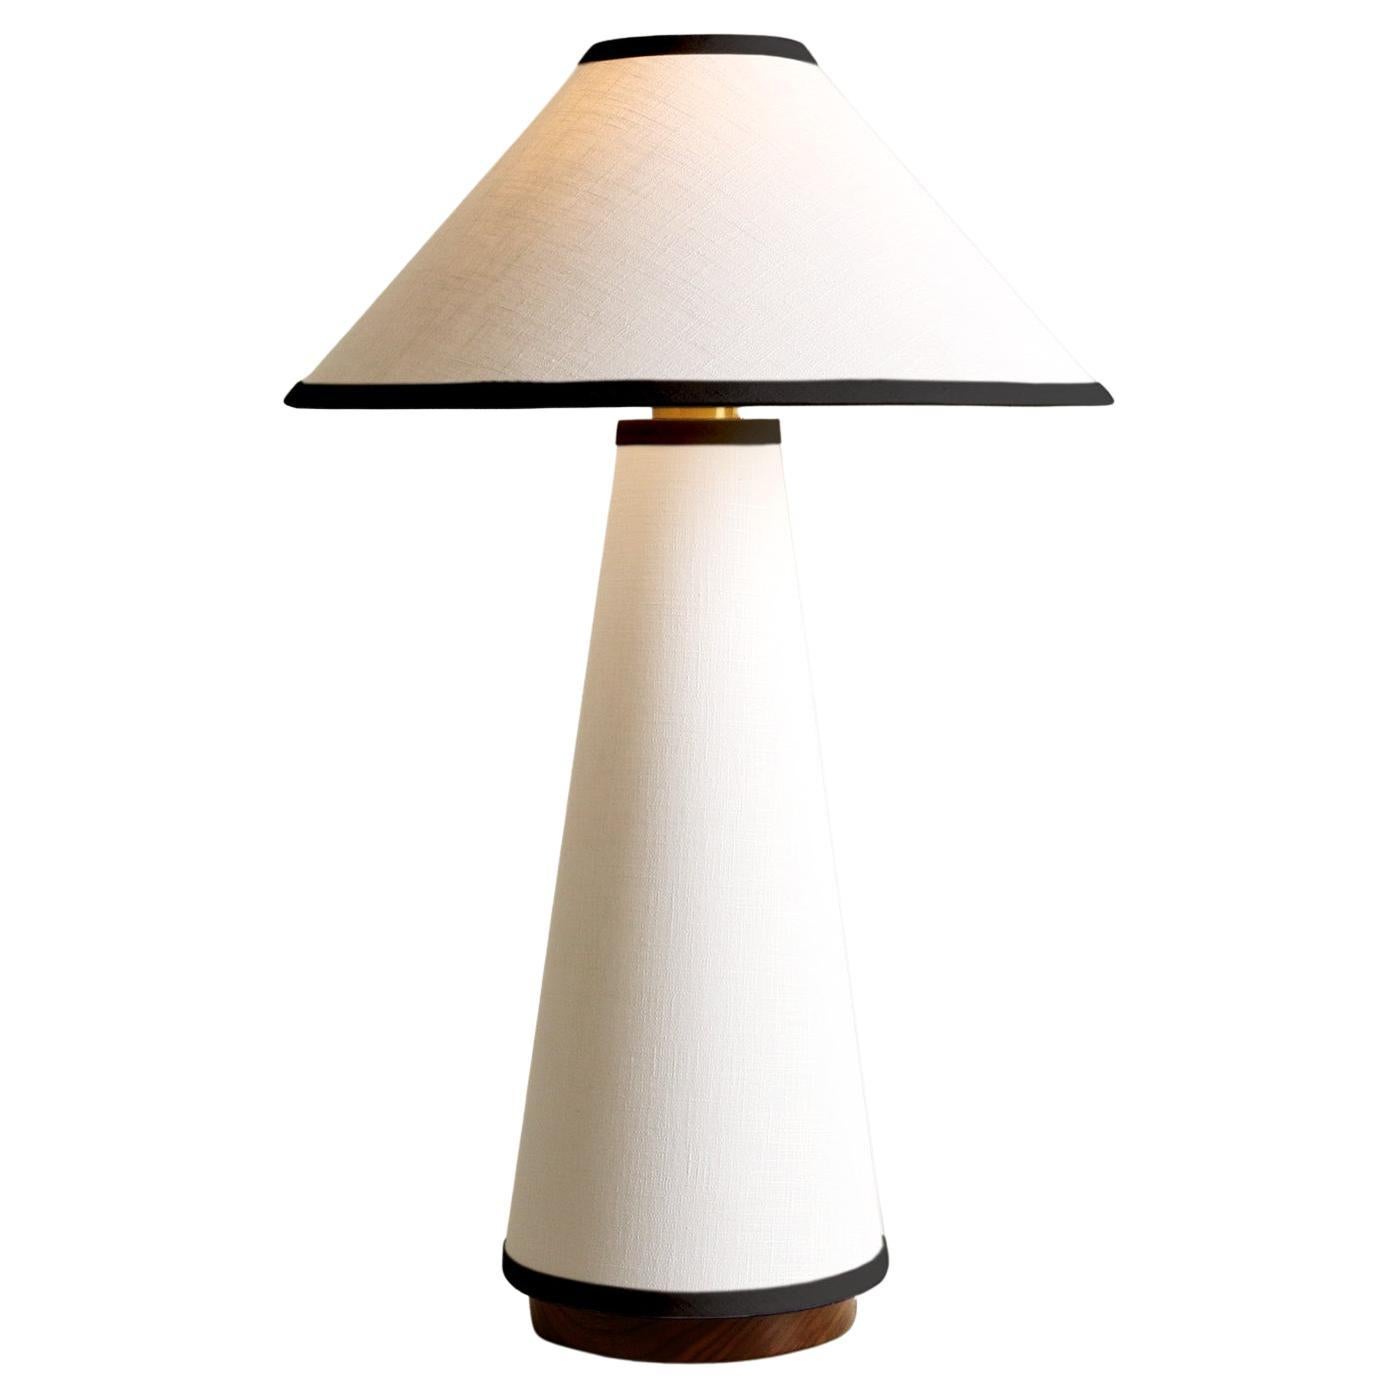 Linden Table Lamp, with Narrow Top Shade and Cream and Black Trim by Studio DUNN For Sale